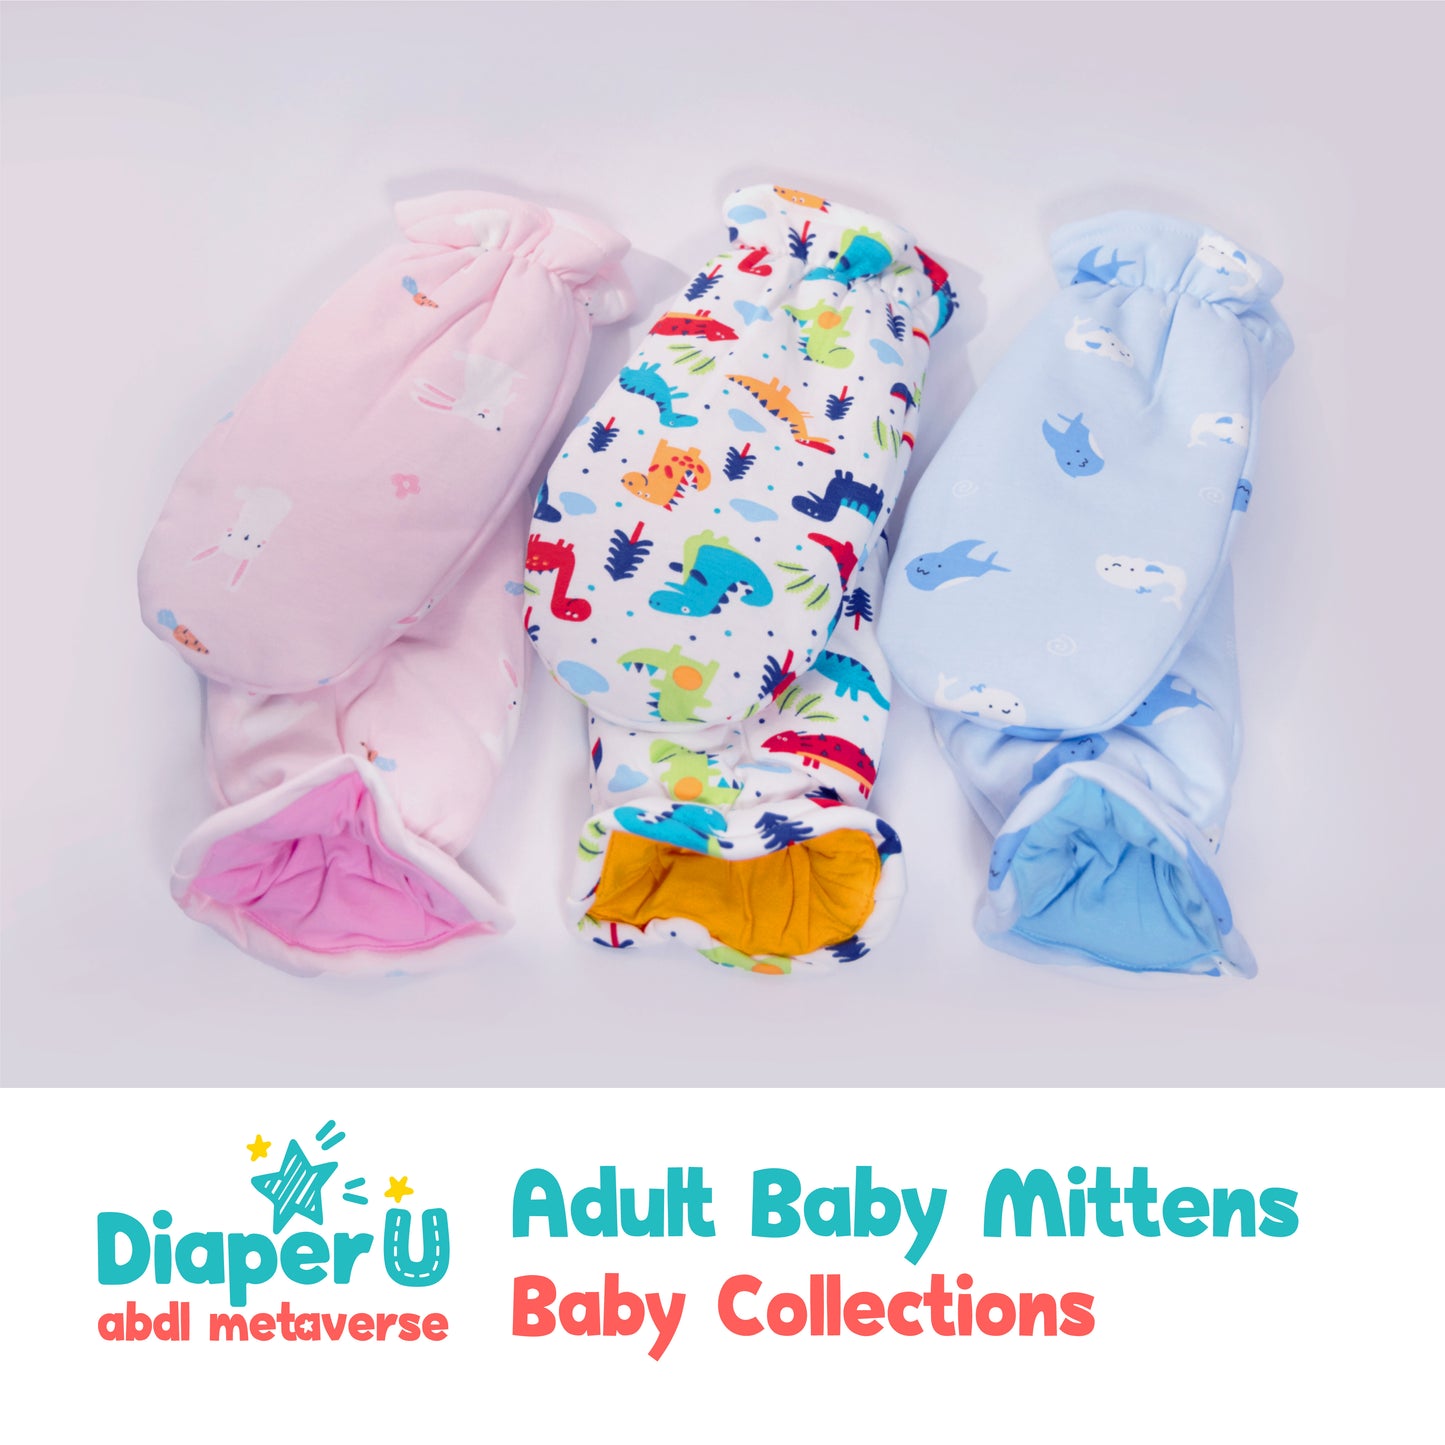 Adult Baby Mittens - Shark & Whale